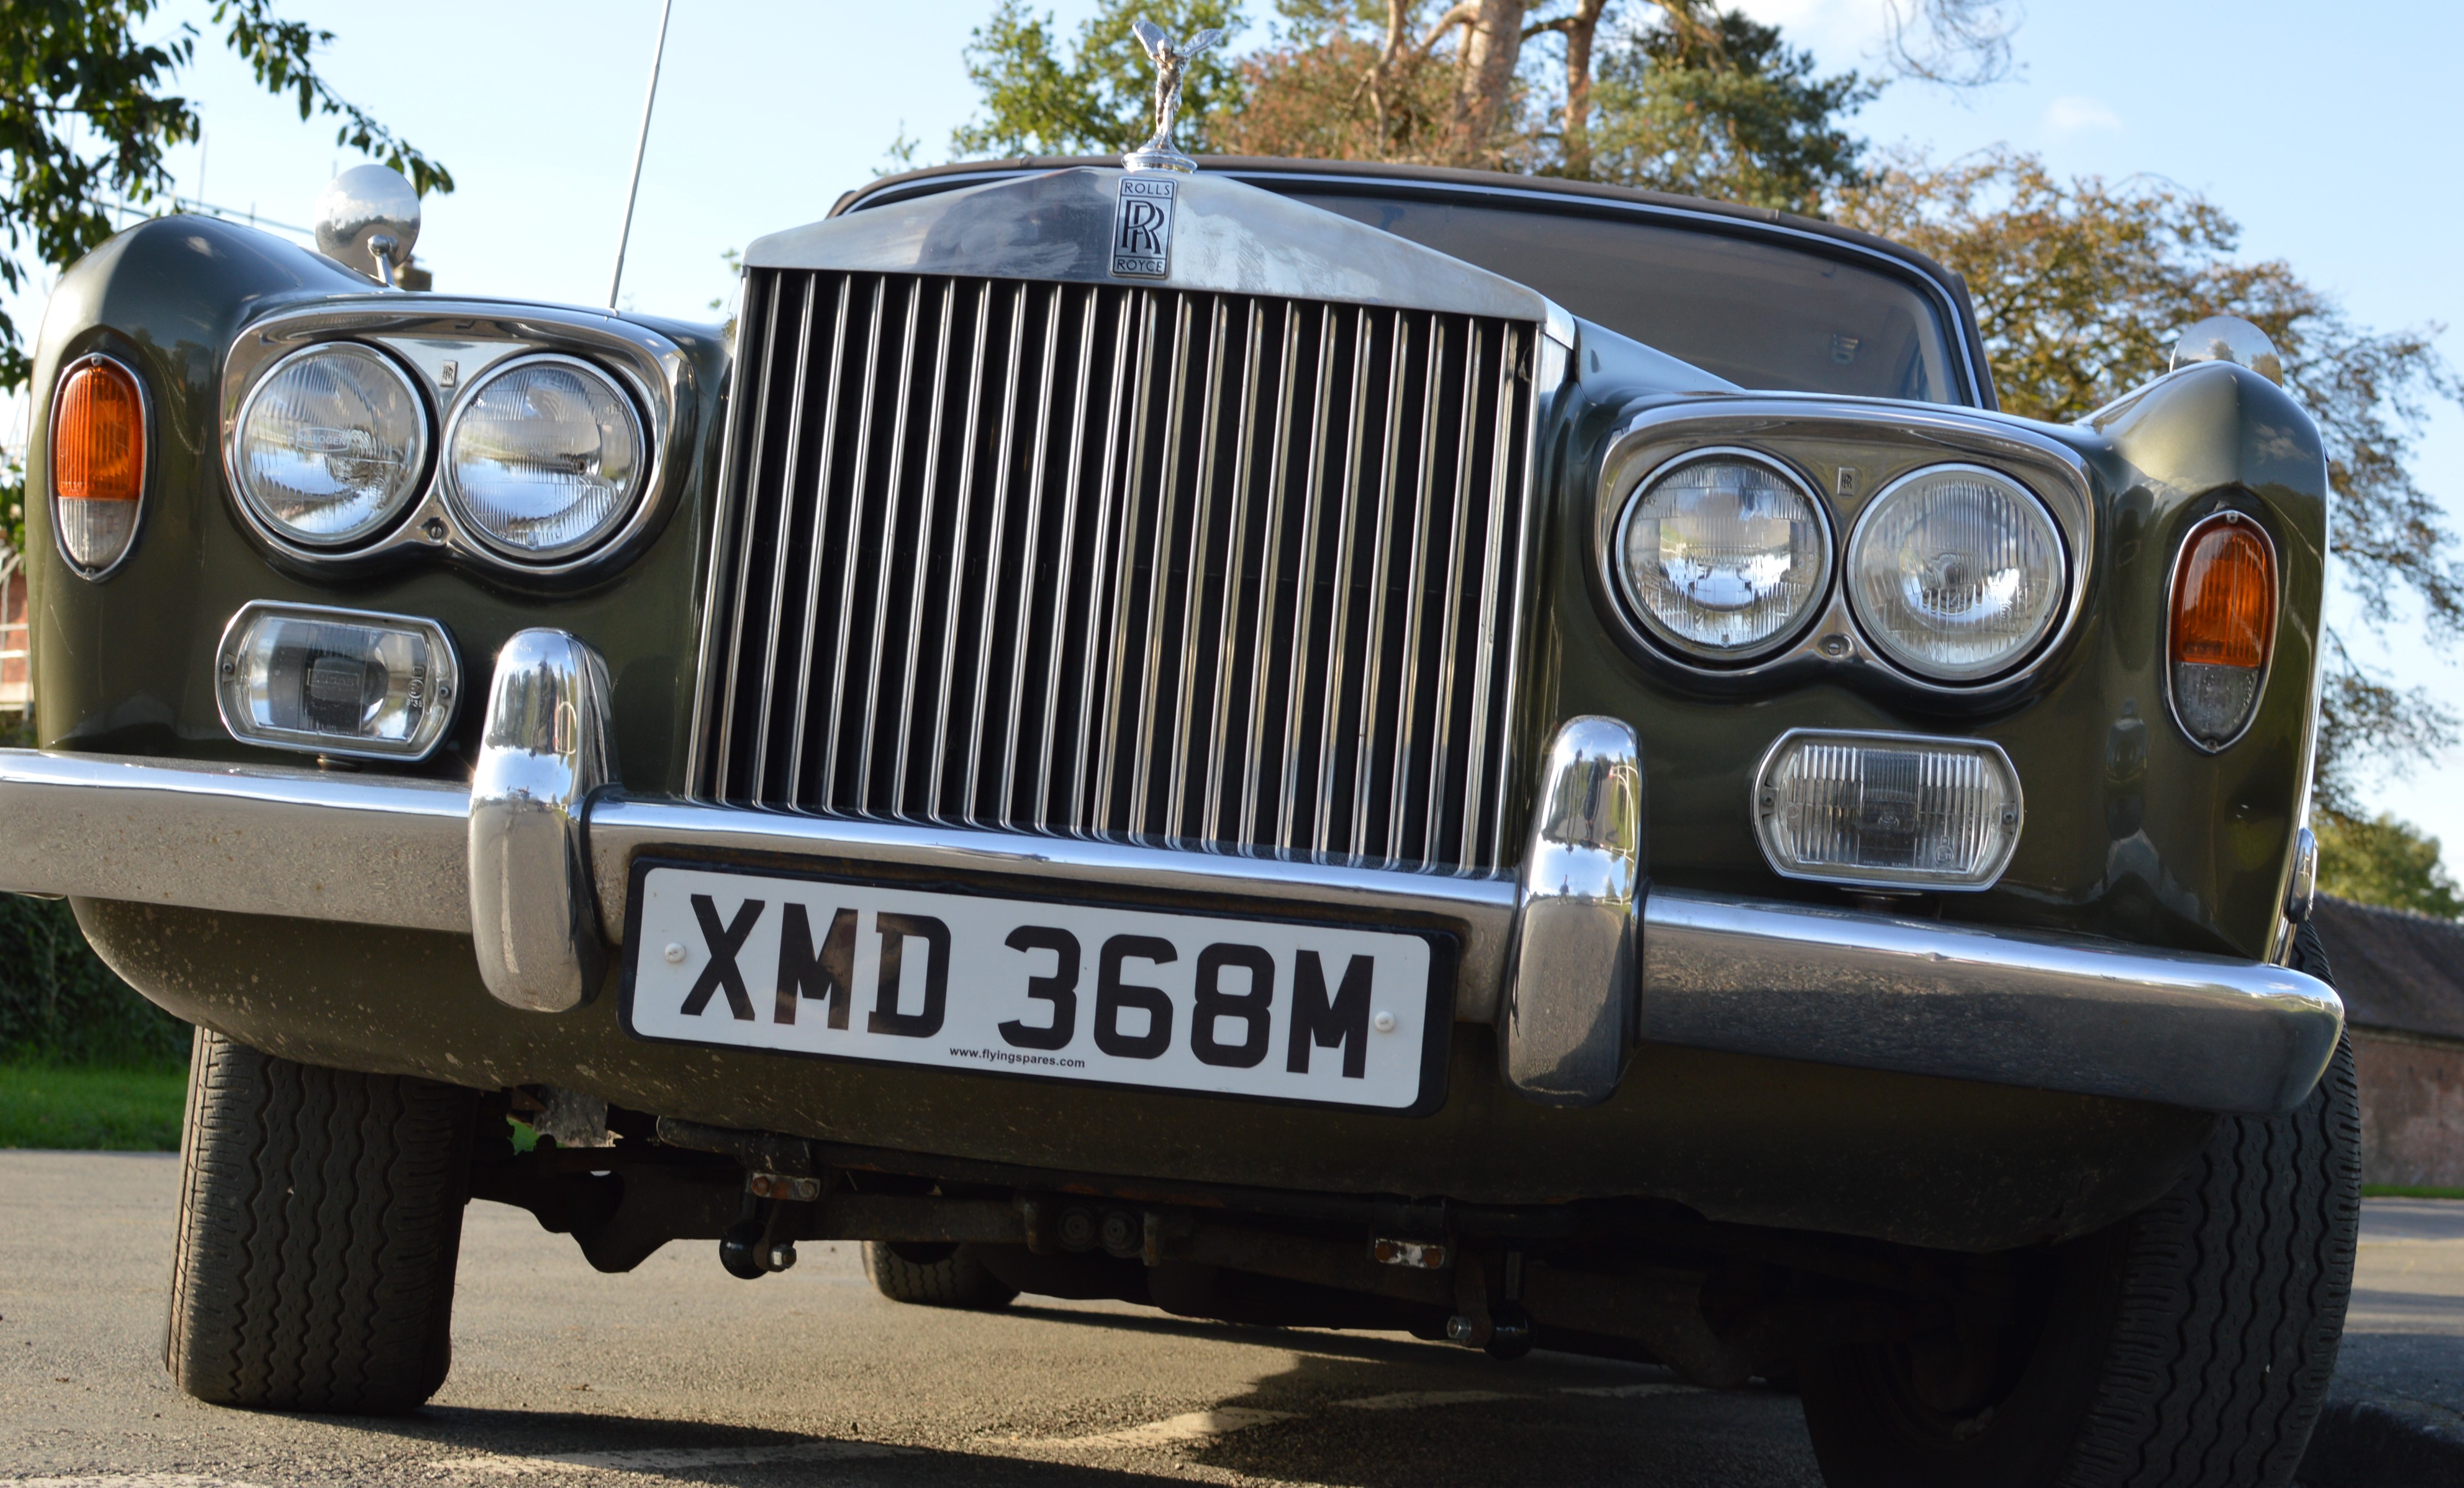 Rolls Royce Silver Shadow ownership. (Part 1) The search for a Rolls Royce  Silver Shadow II 